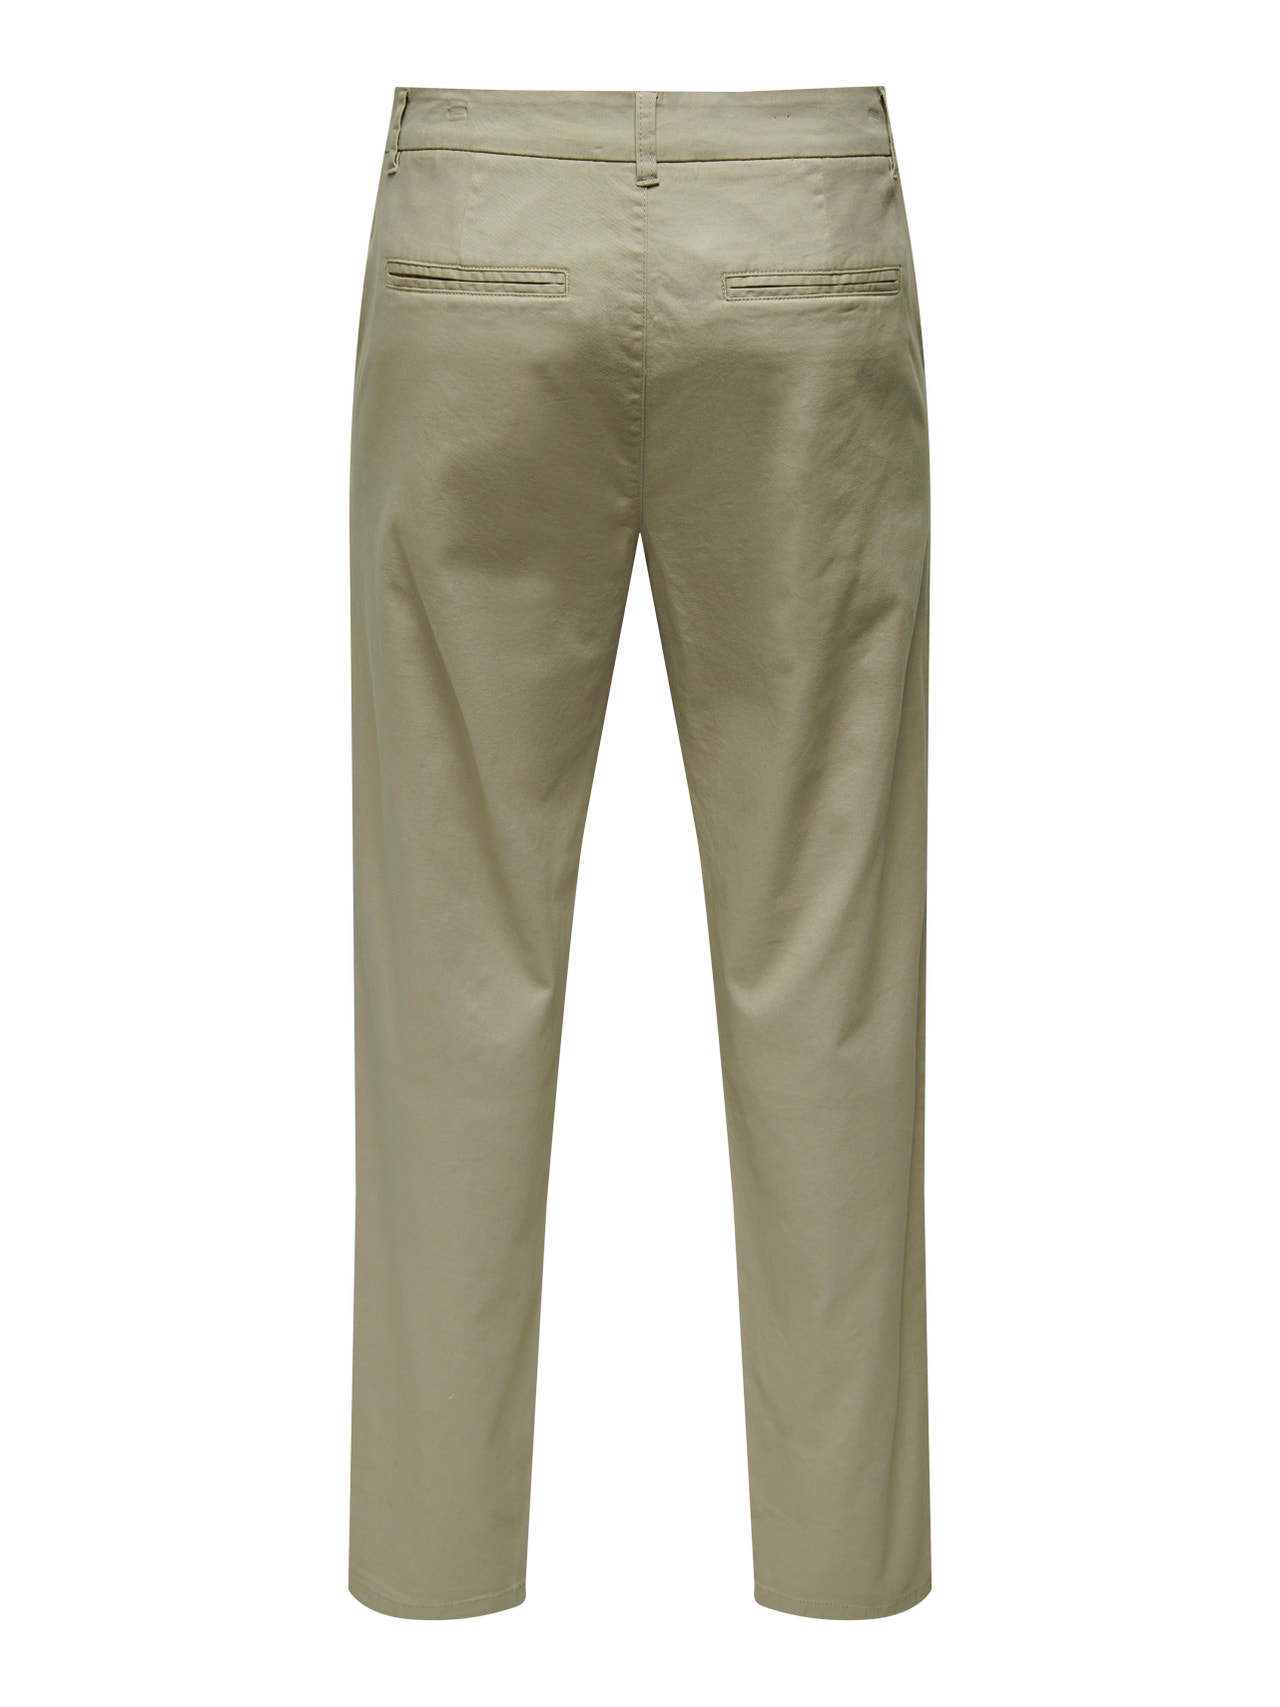 ONLY & SONS Pantalones Corte tapered Talle medio -Crockery - 22026225